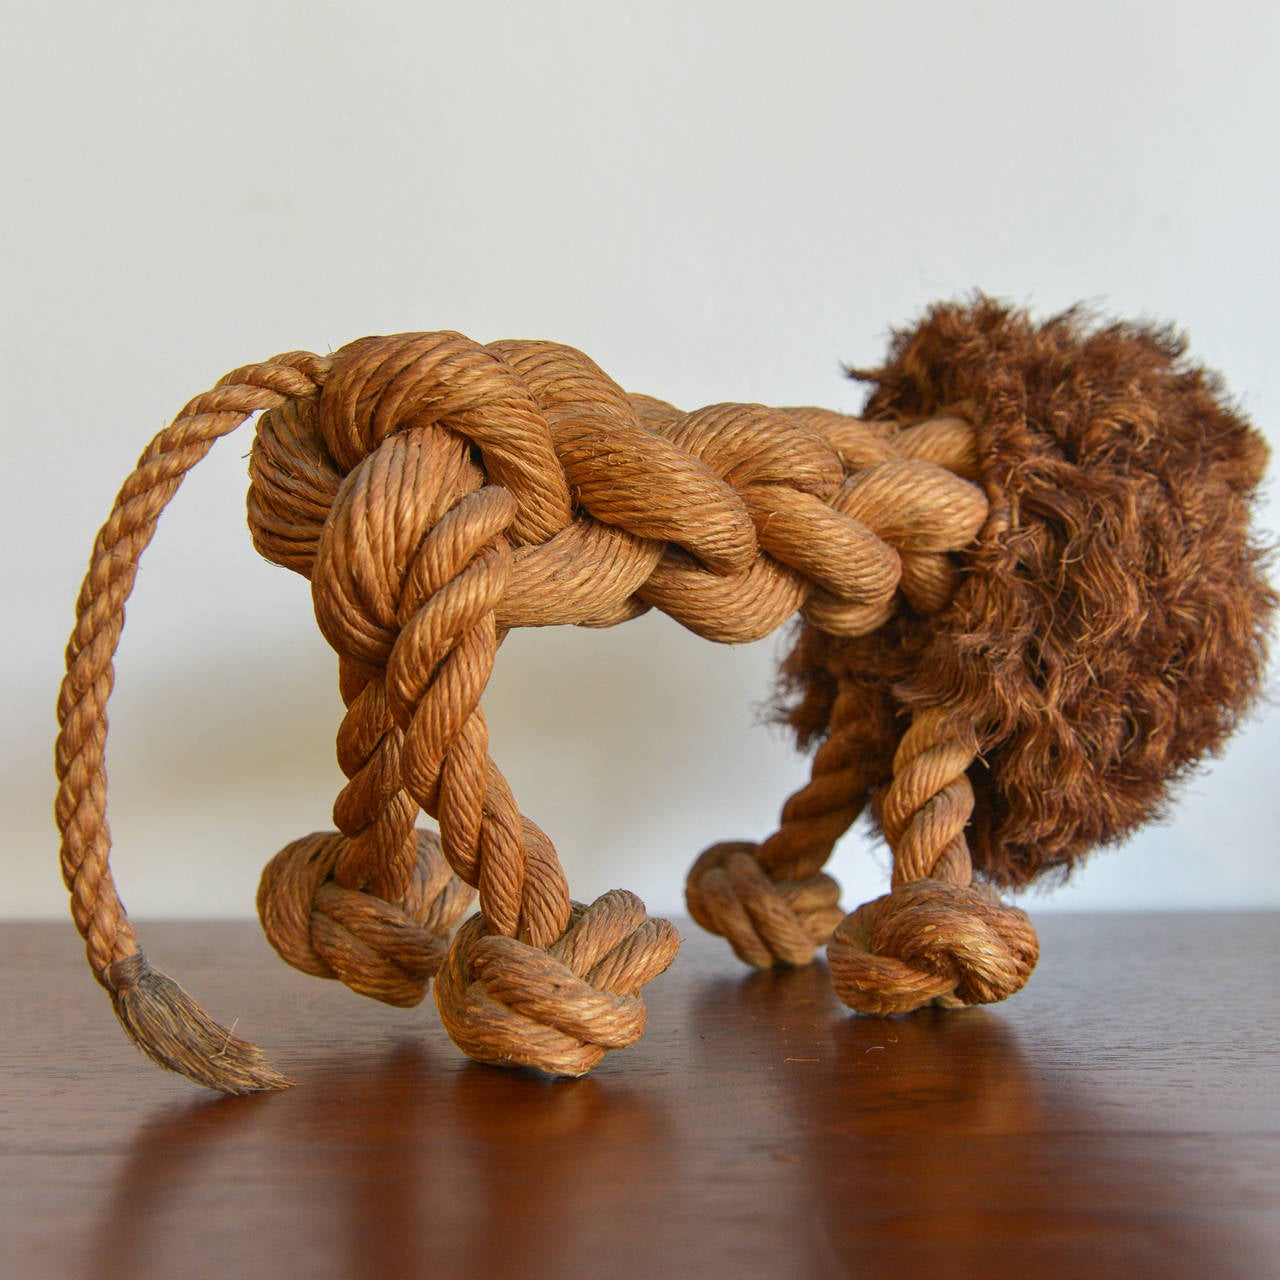 This adorable little rope lion is a pretty rare piece of Danish toy history. Beautifully handcrafted by Jorgen Bloch of Denmark, the rope is made into an adorable lion figure complete with whiskers, mane and a long tail. 100% original, these pieces